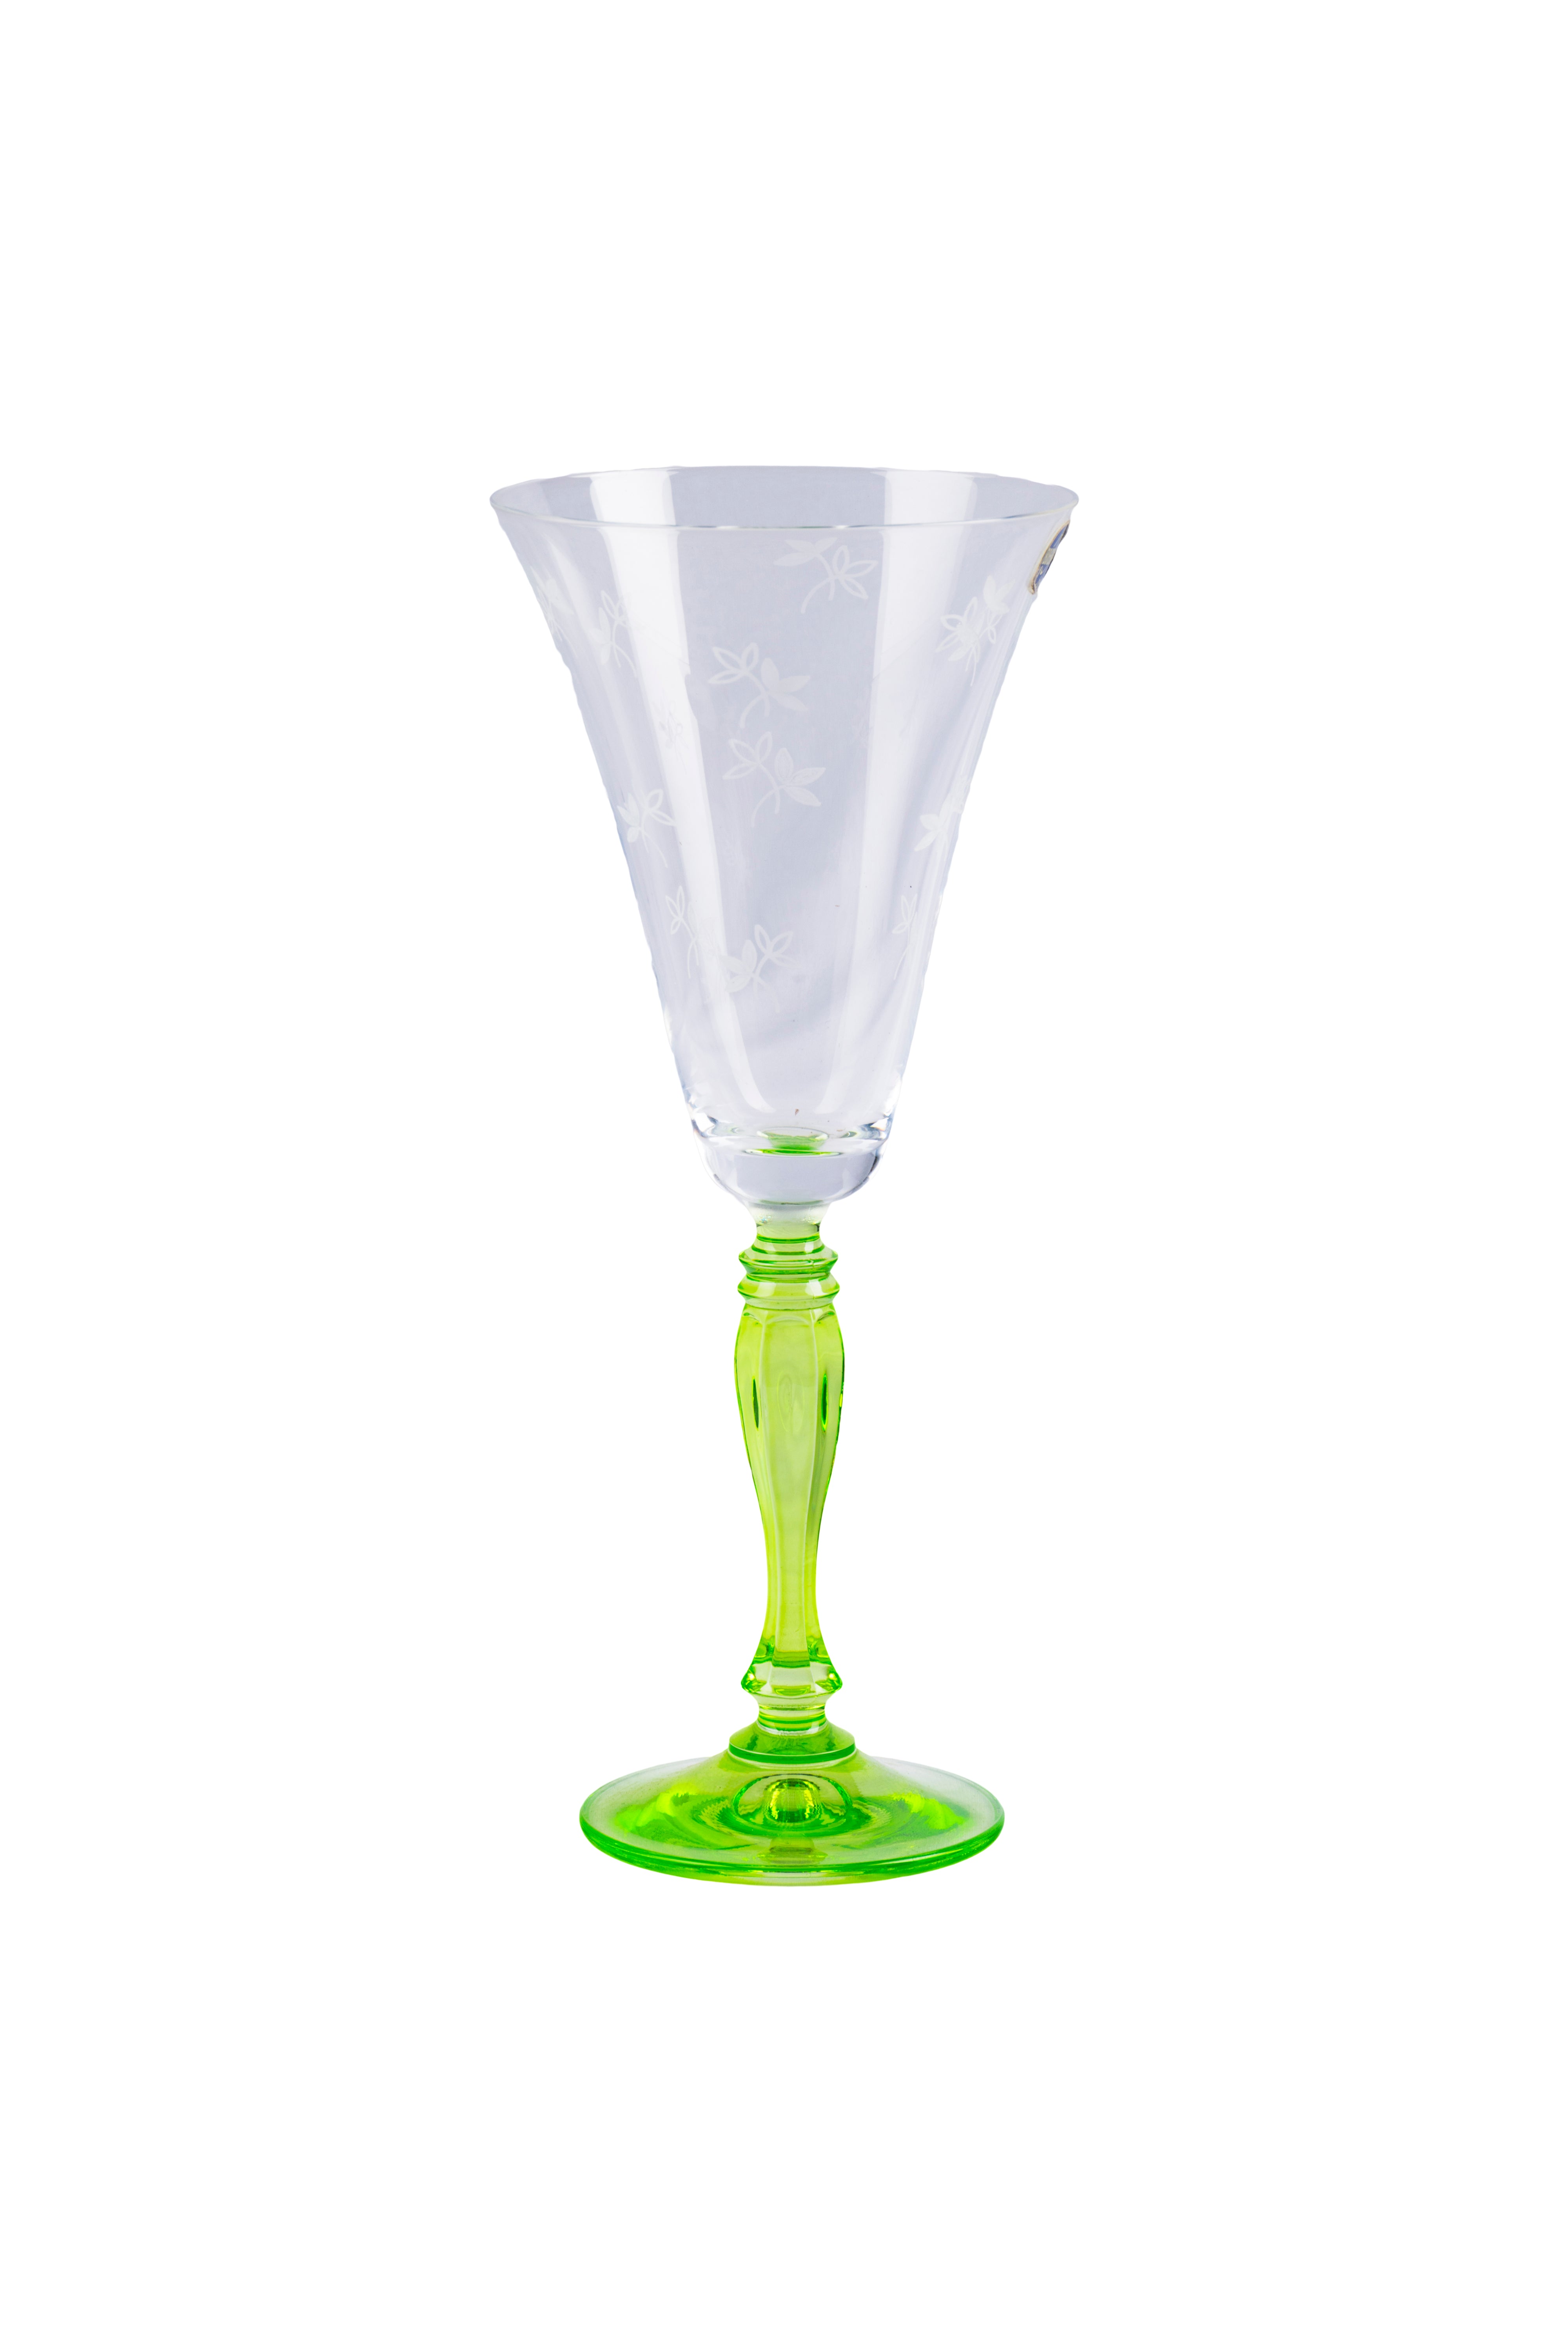 CAESAR CRYSTAL BOHEMIAE - Bell Shaped Crystal Cut Glass in Green Color - Bespoke Cocktail Green Flute Glass with Fine Detailing.